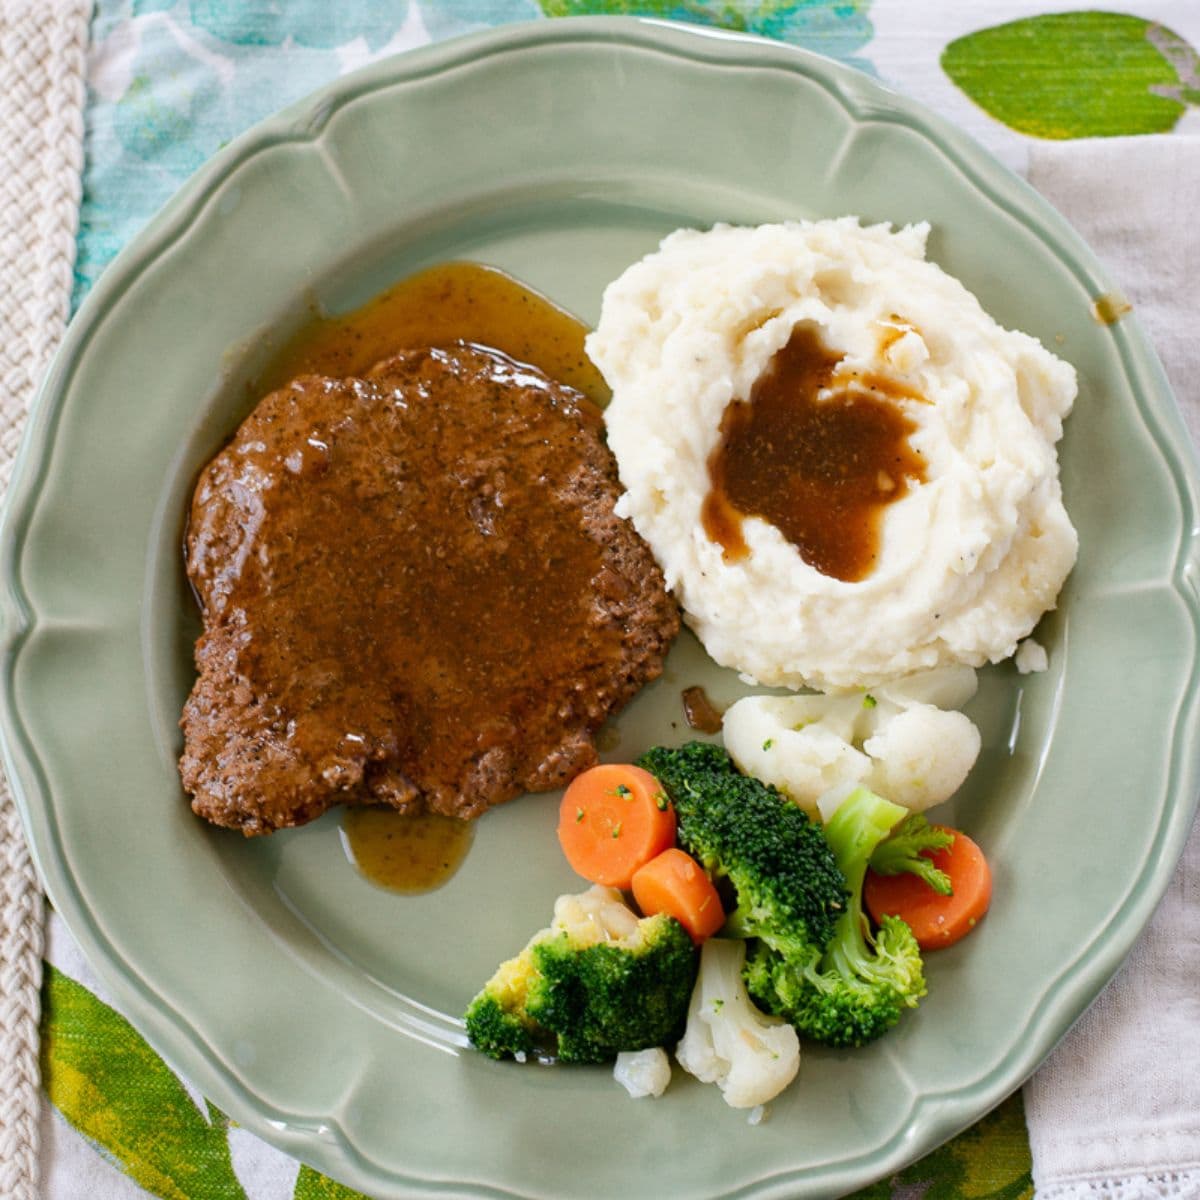 A serving of Cube Steak smothered in gravy with mashed potatoes and vegetables on a dinner plate.